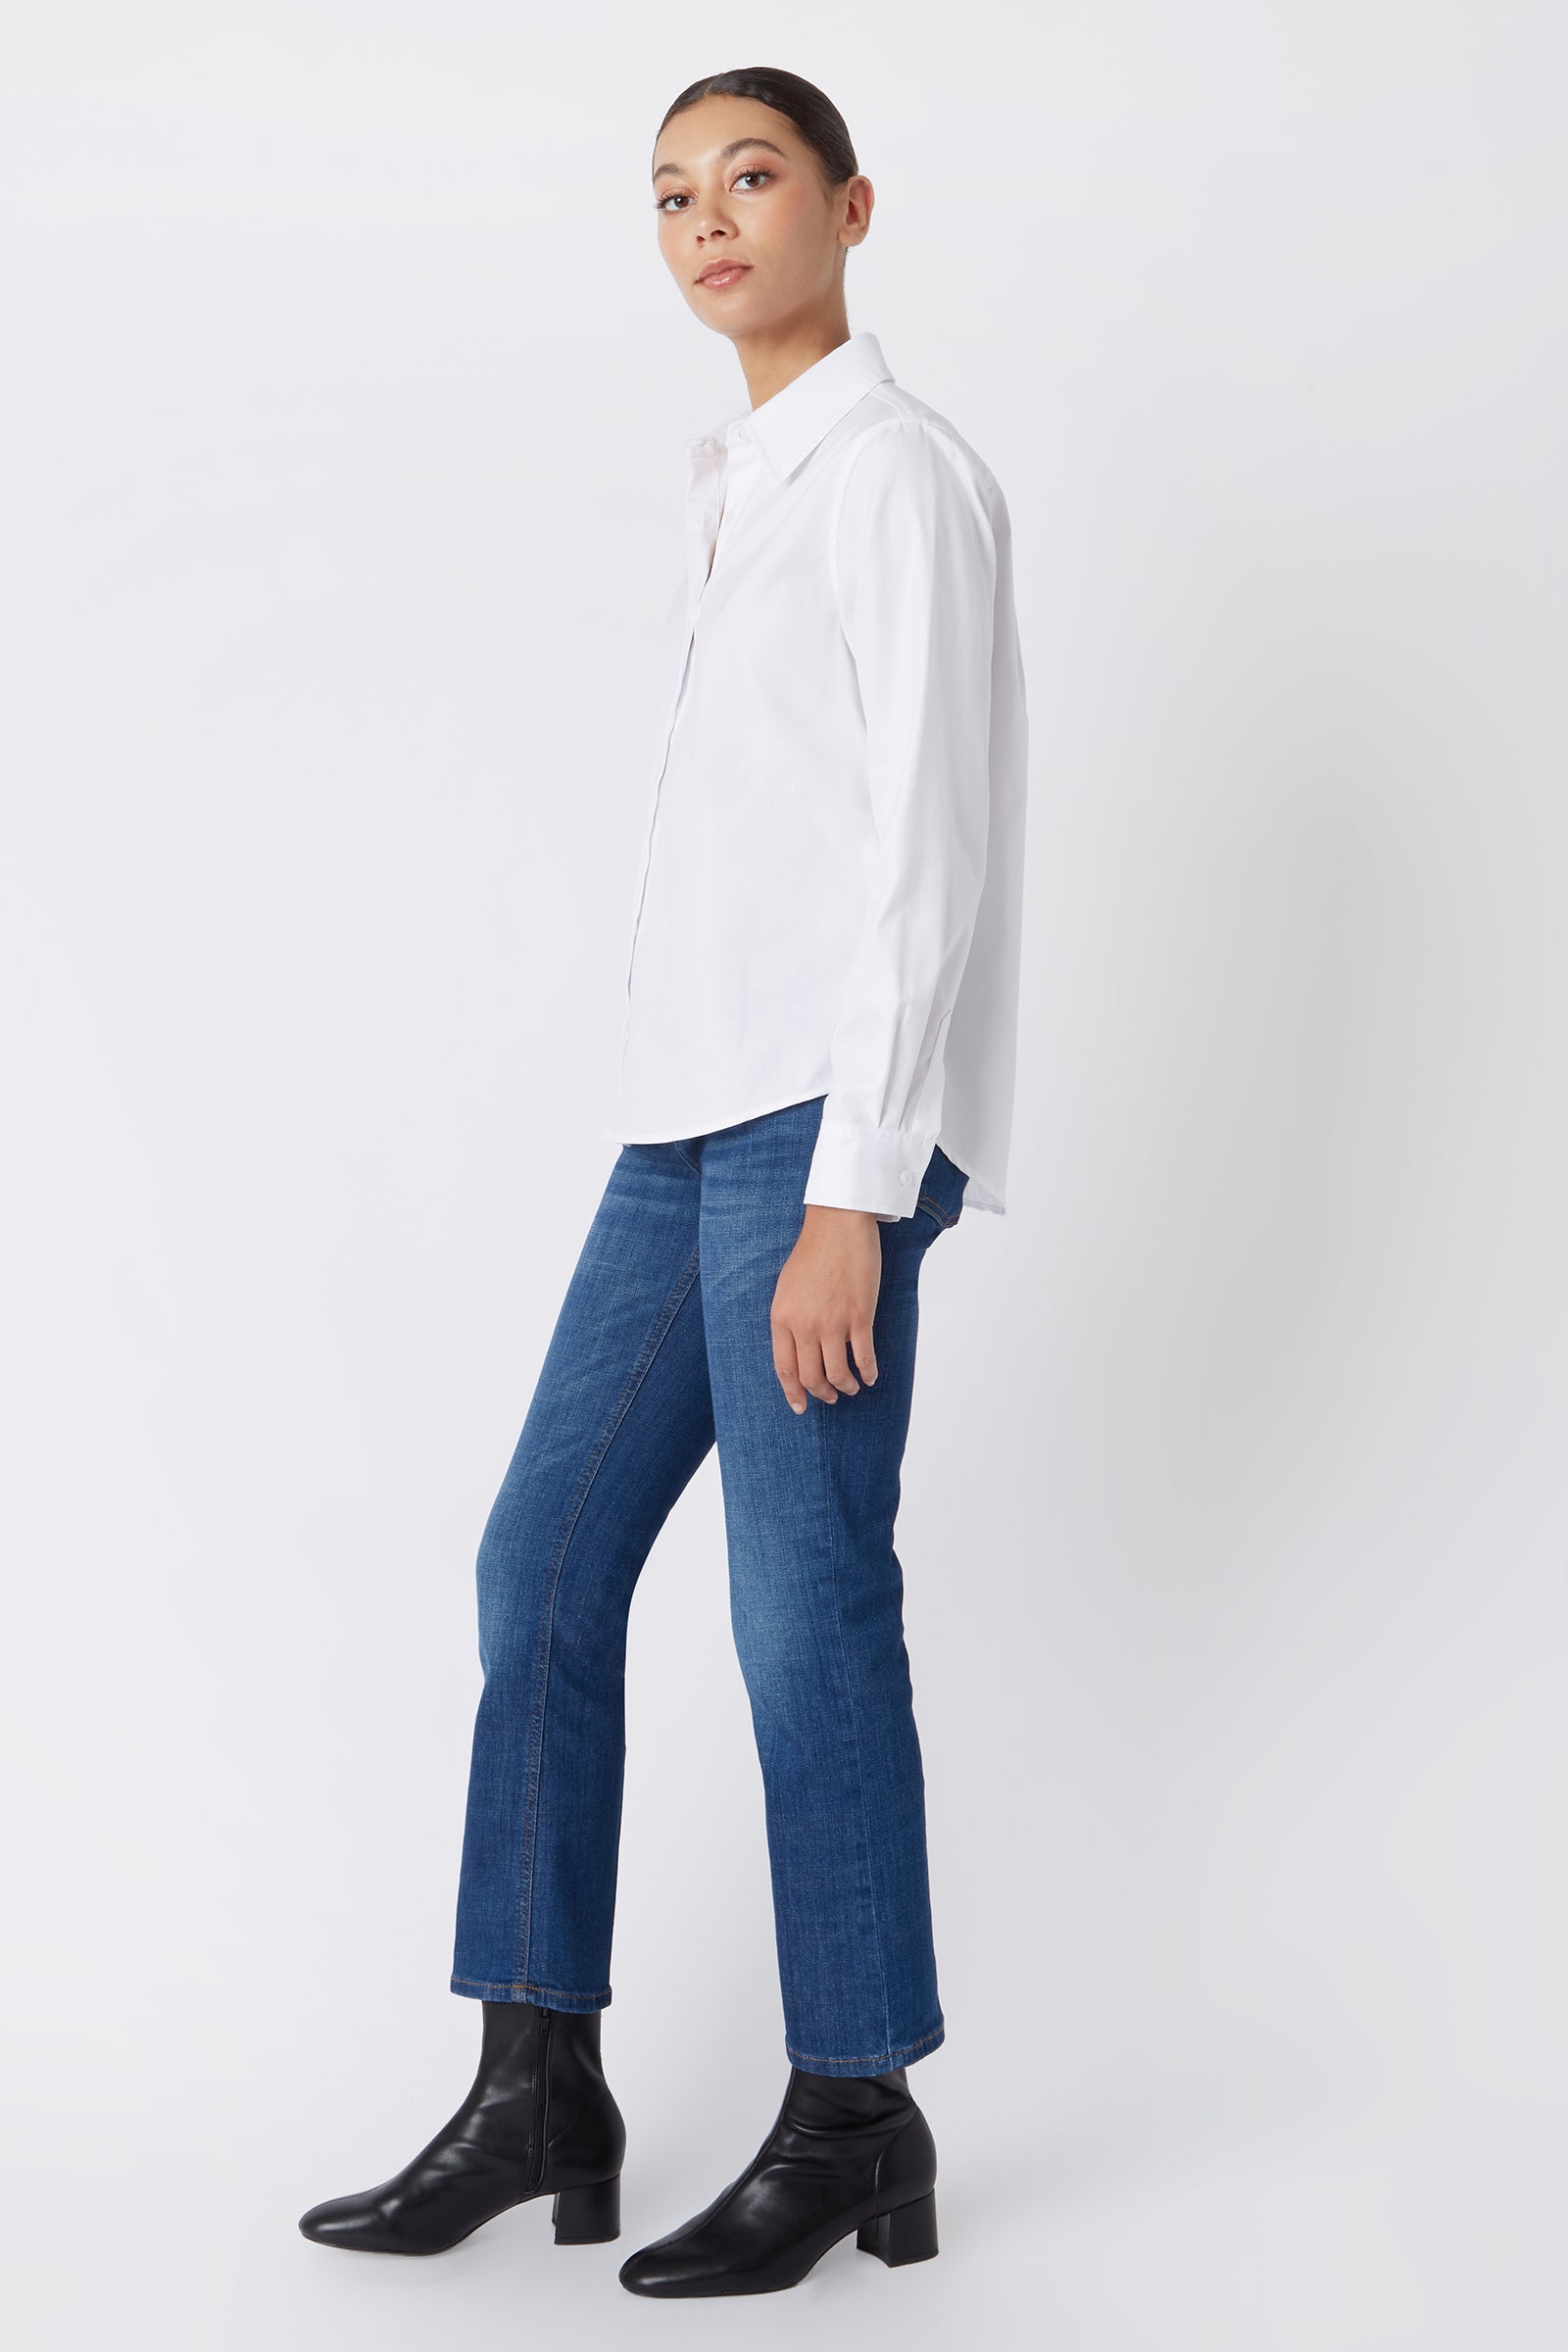 Kal Rieman Classic Tailored Shirt in White Stretch on Model Full Side View